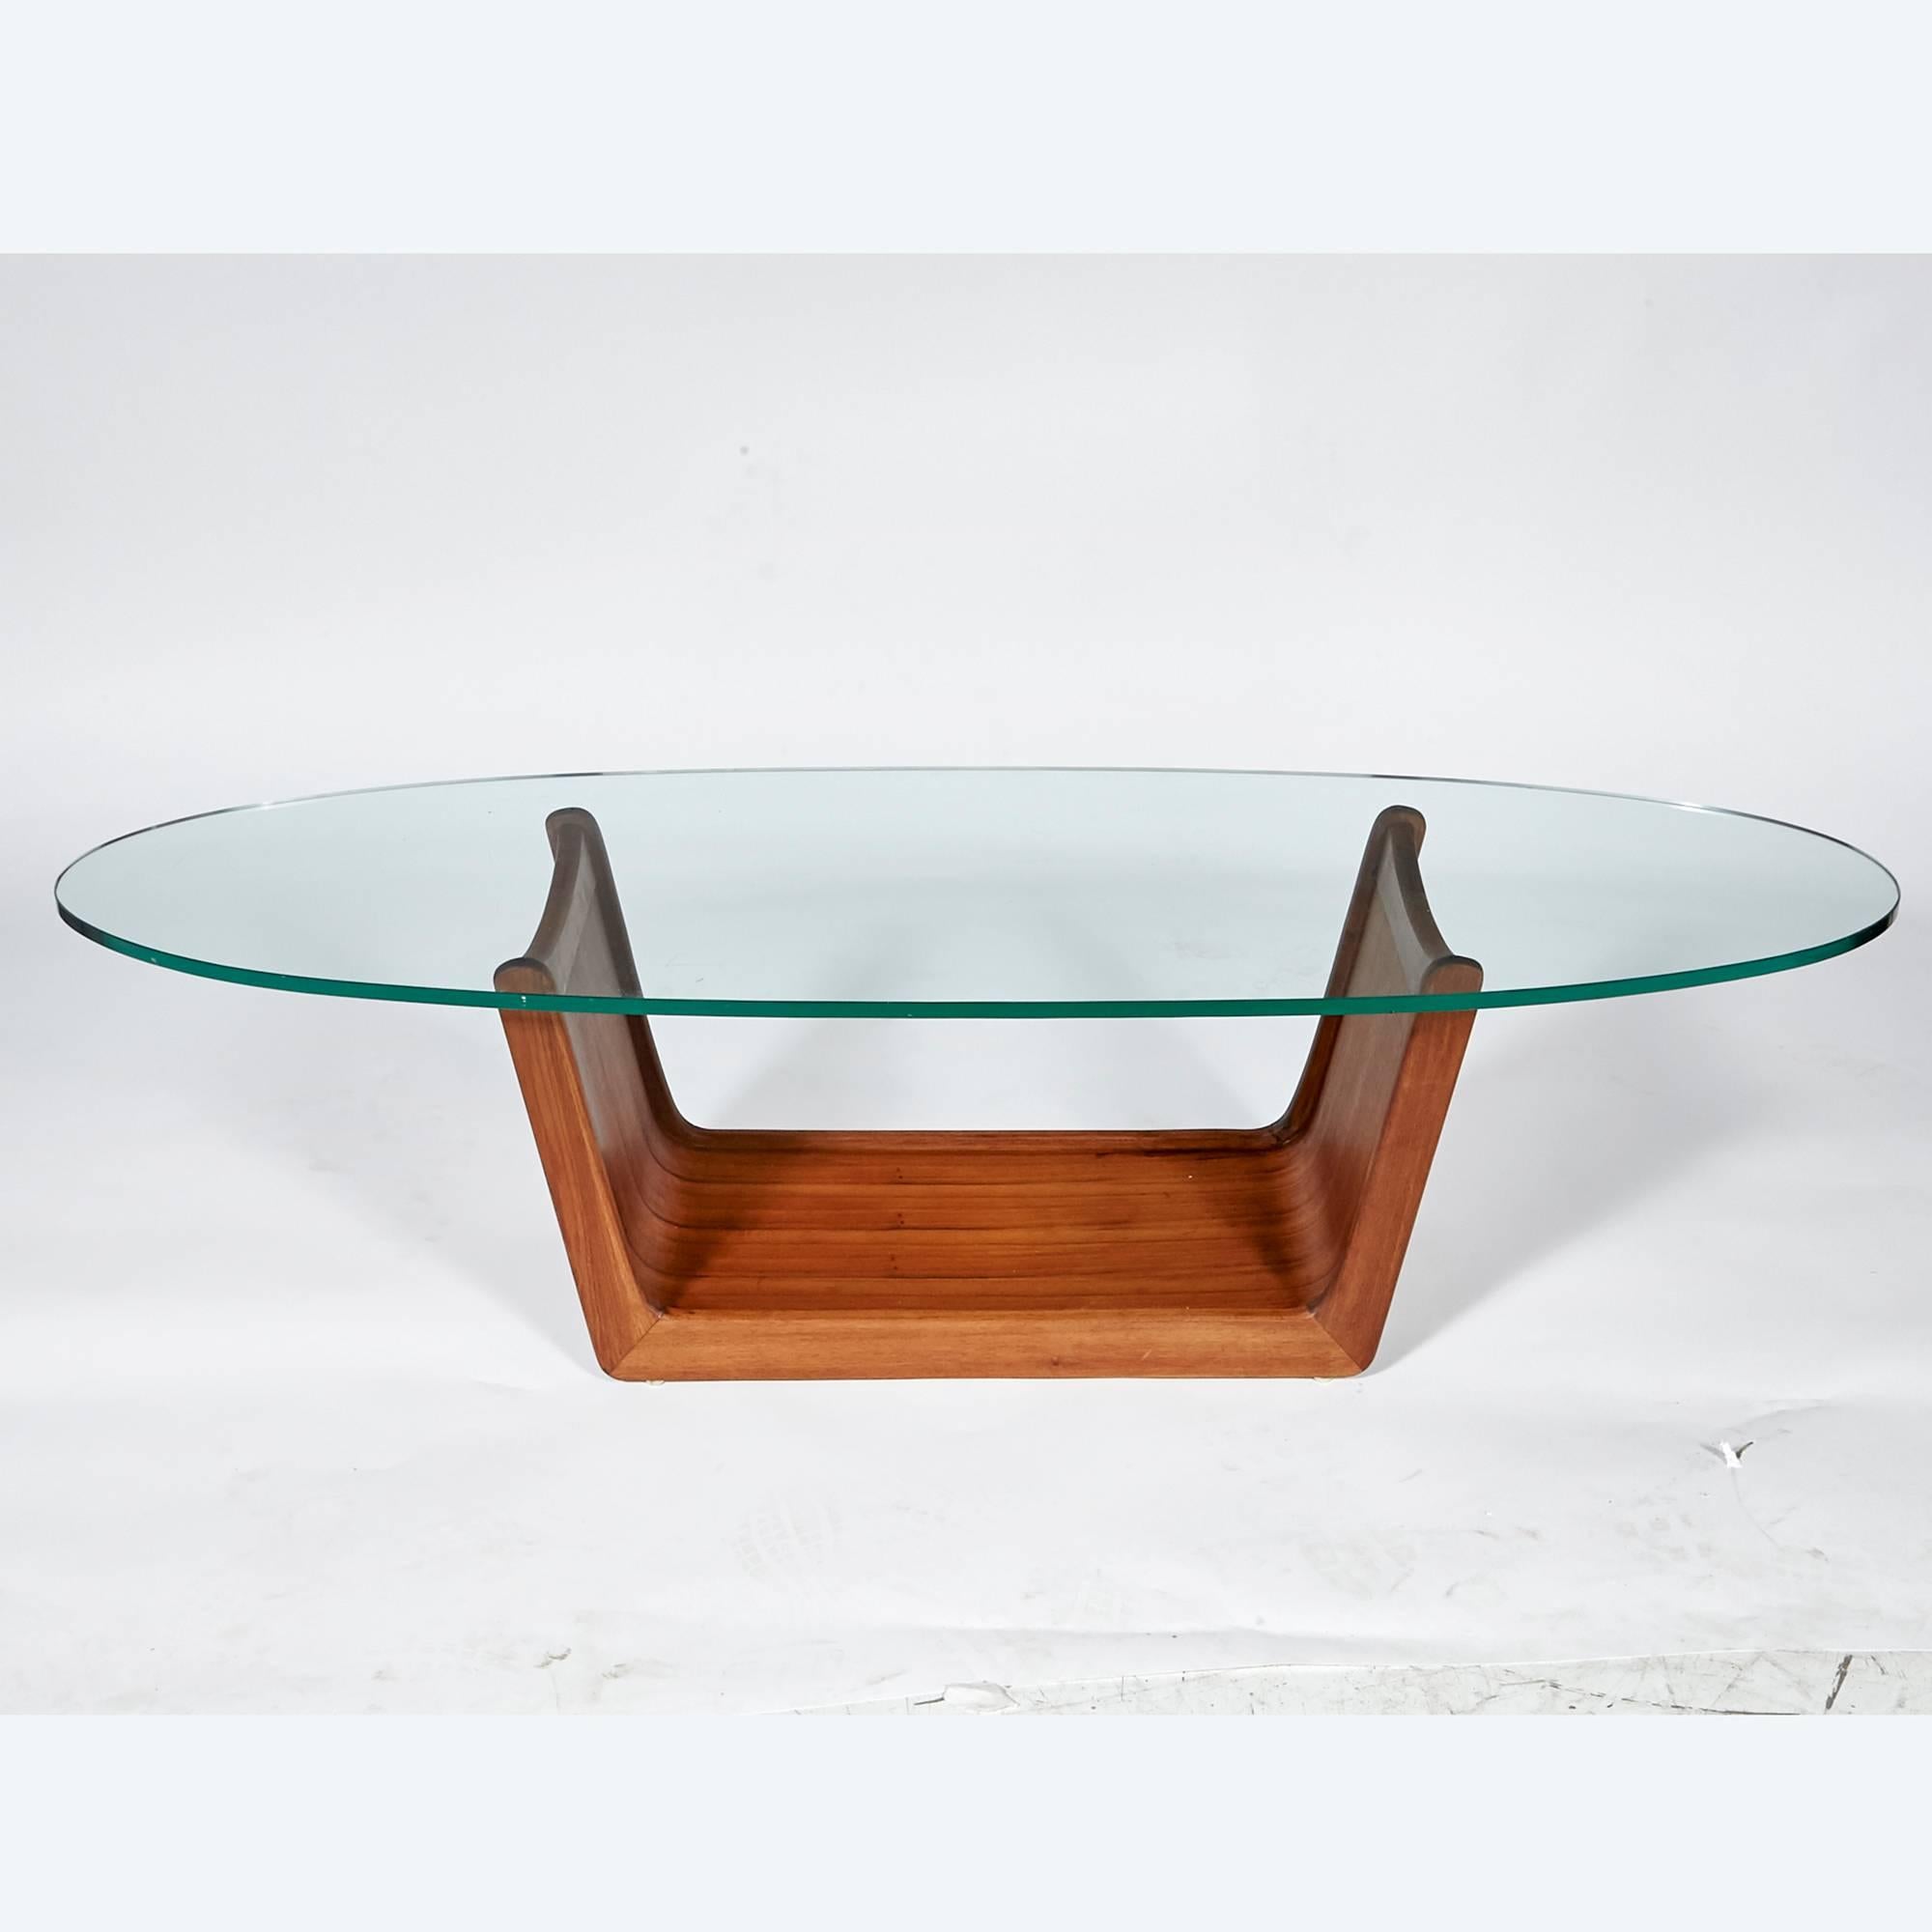 Vintage Mid-Century Modern oval glass top walnut based coffee table designed by Adrian Pearsall. Base is in refinished condition.